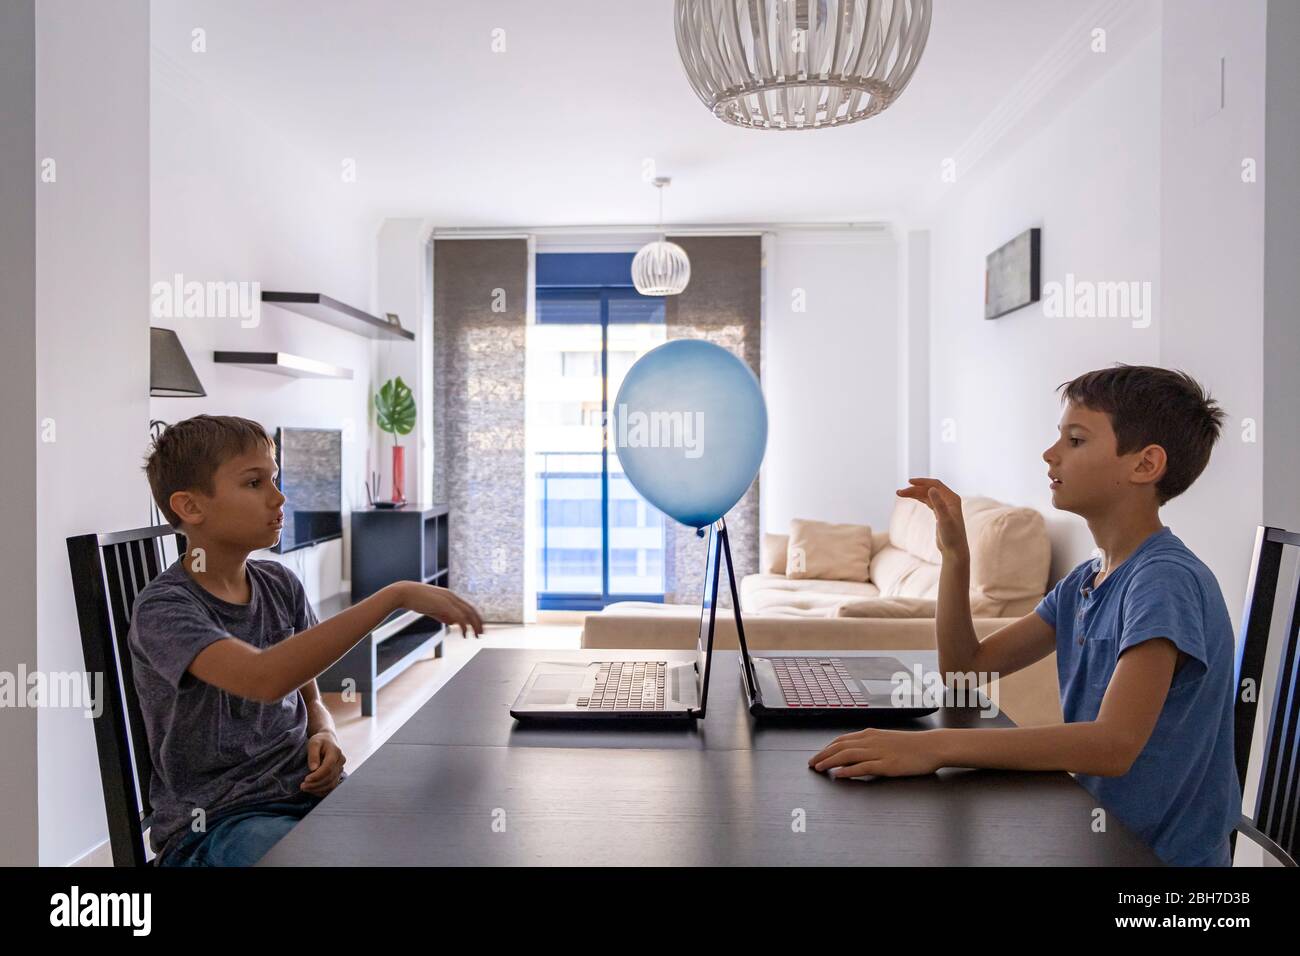 Children learning with laptop computer and play with balloon at home. Technology, education, online distance learning for kids Stock Photo